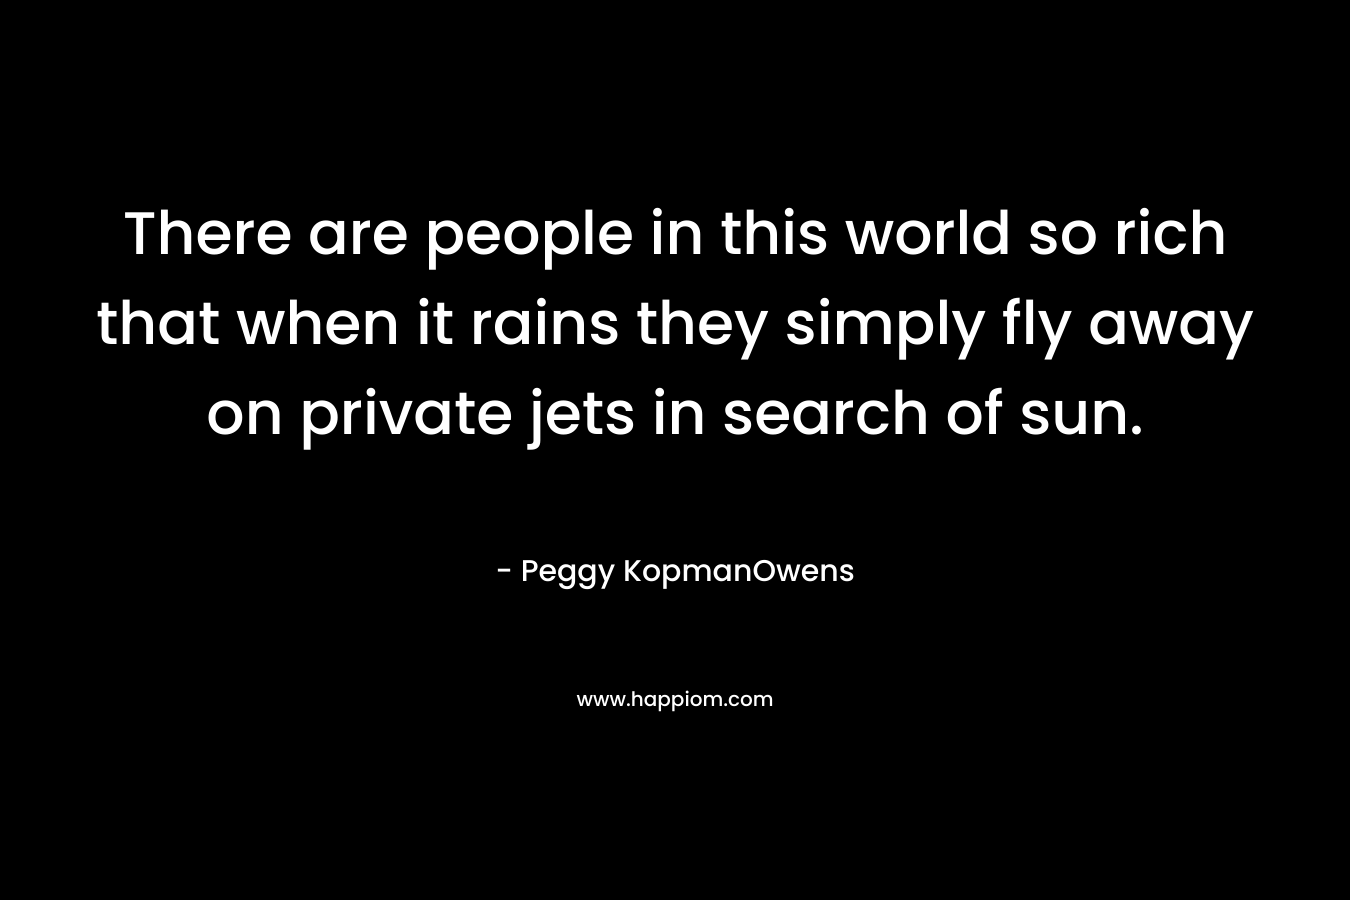 There are people in this world so rich that when it rains they simply fly away on private jets in search of sun.